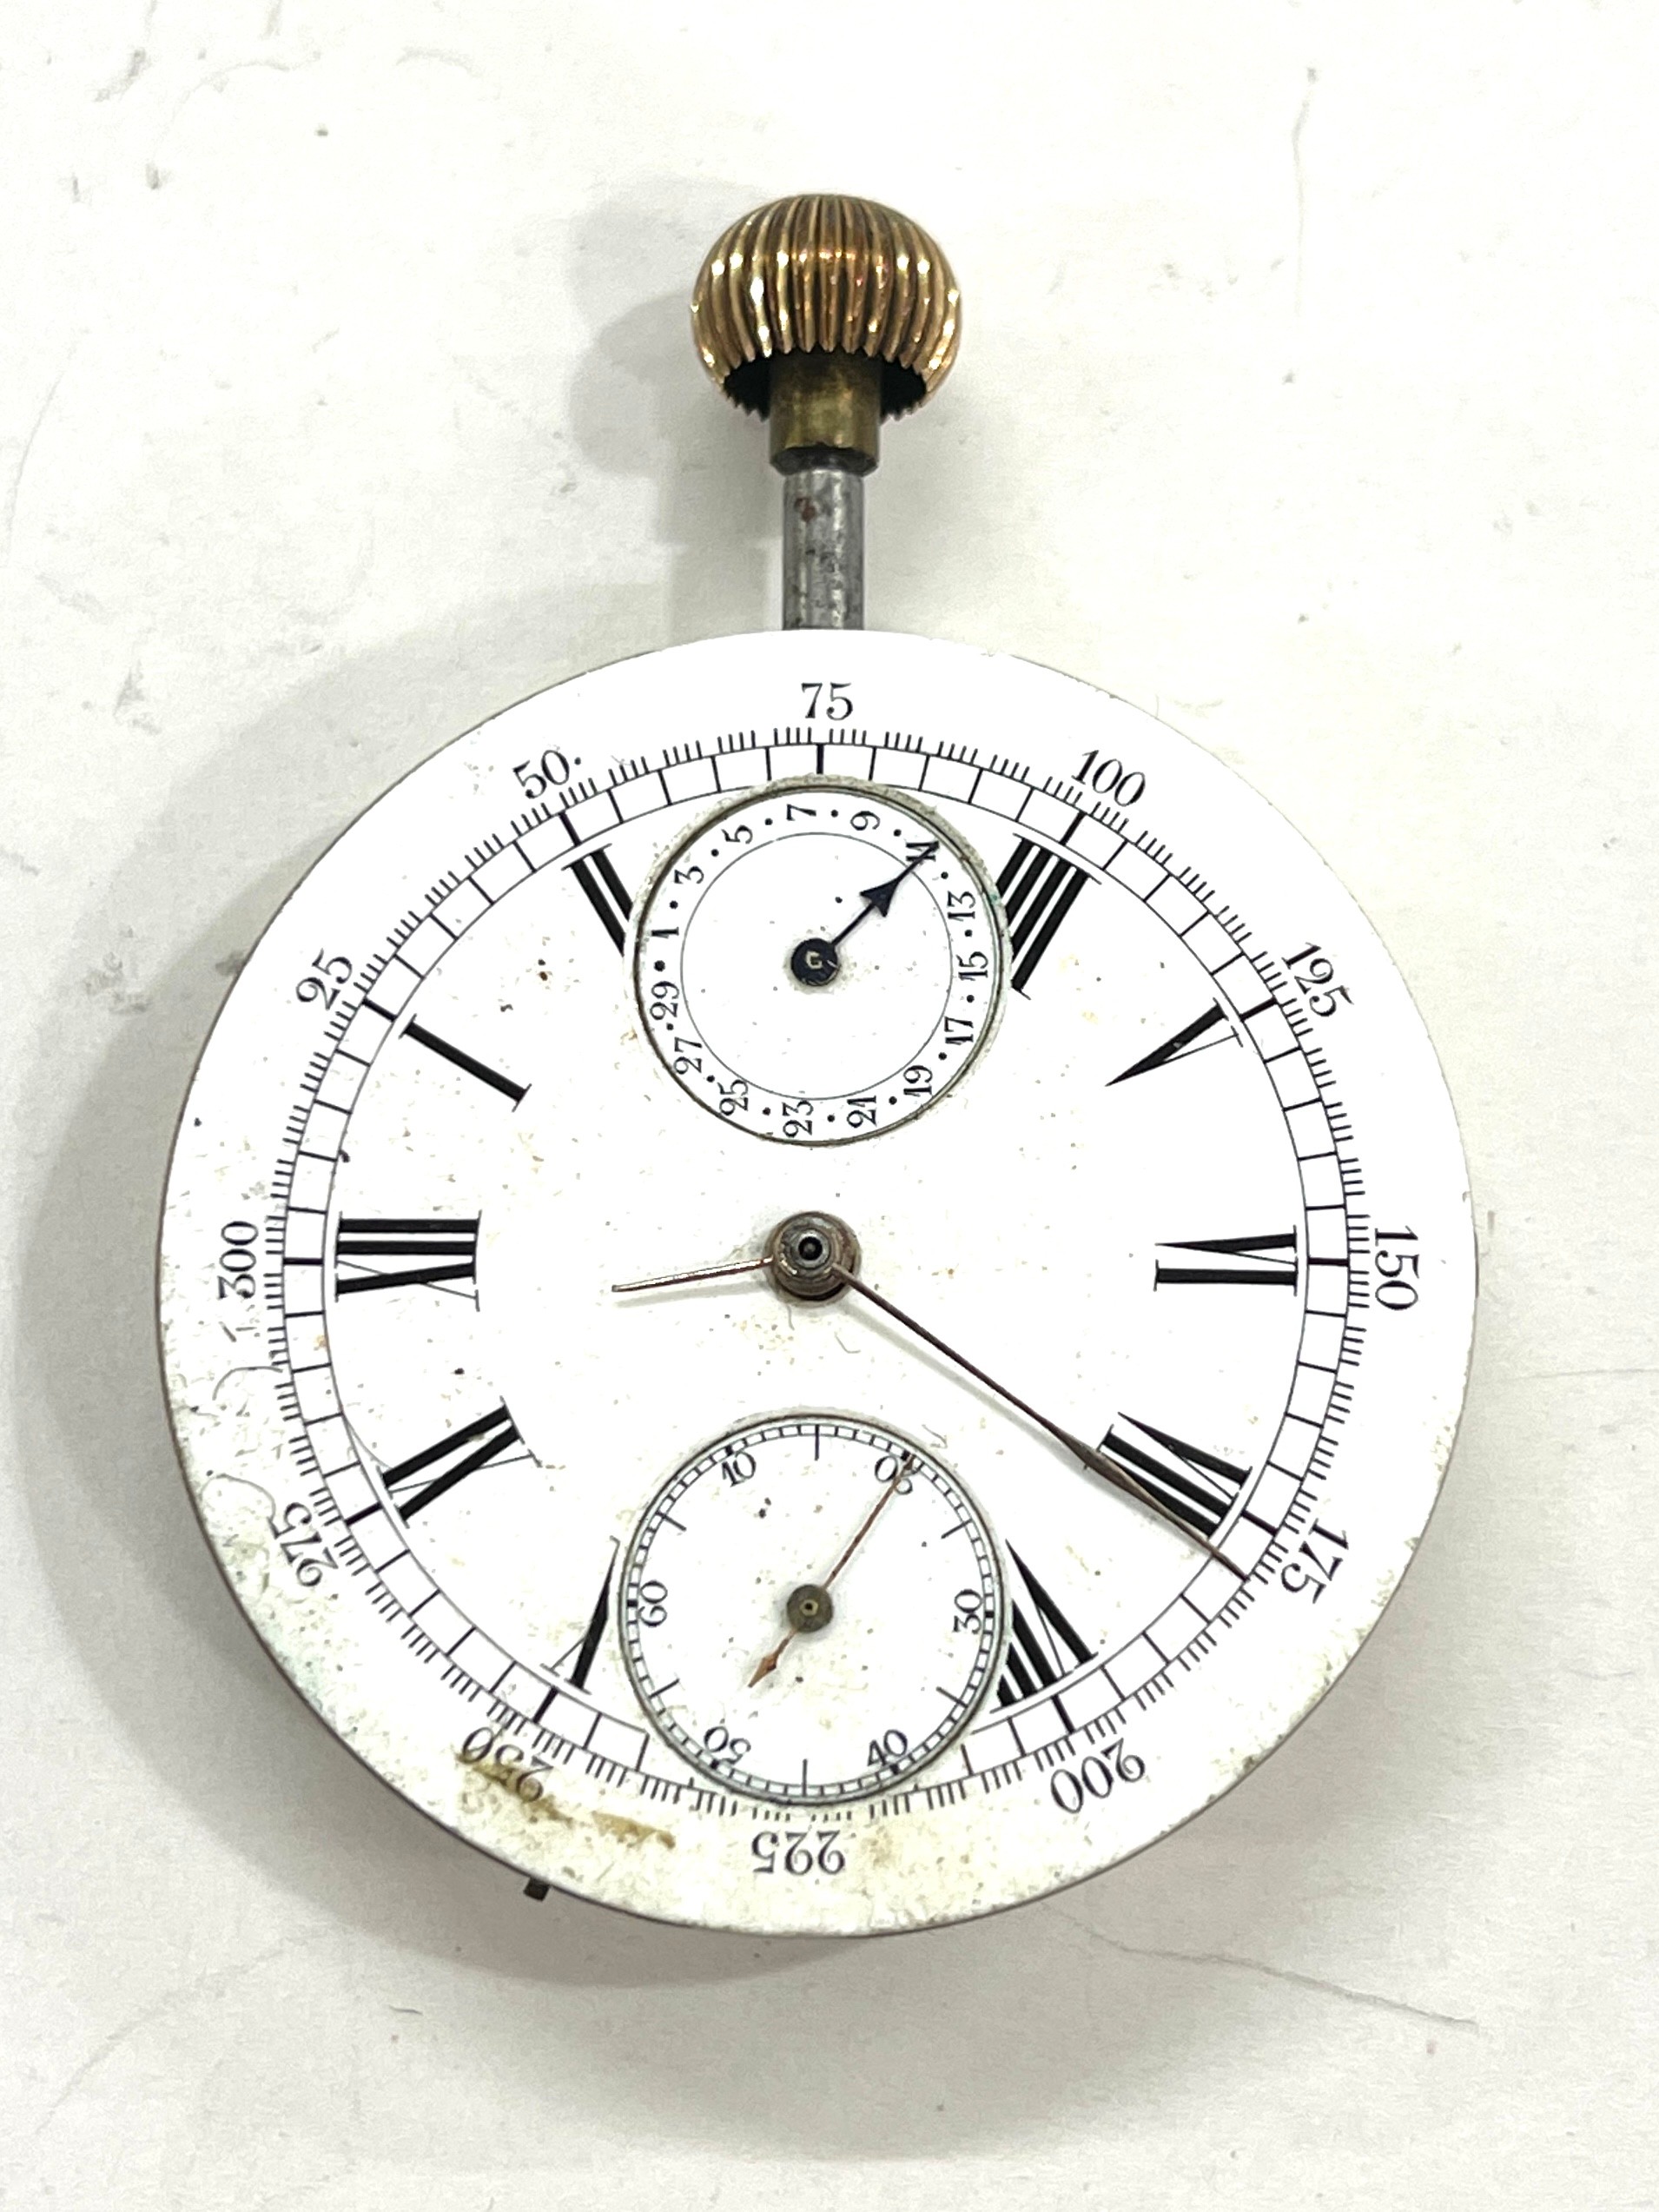 Complicated chronograph pocket watch movement